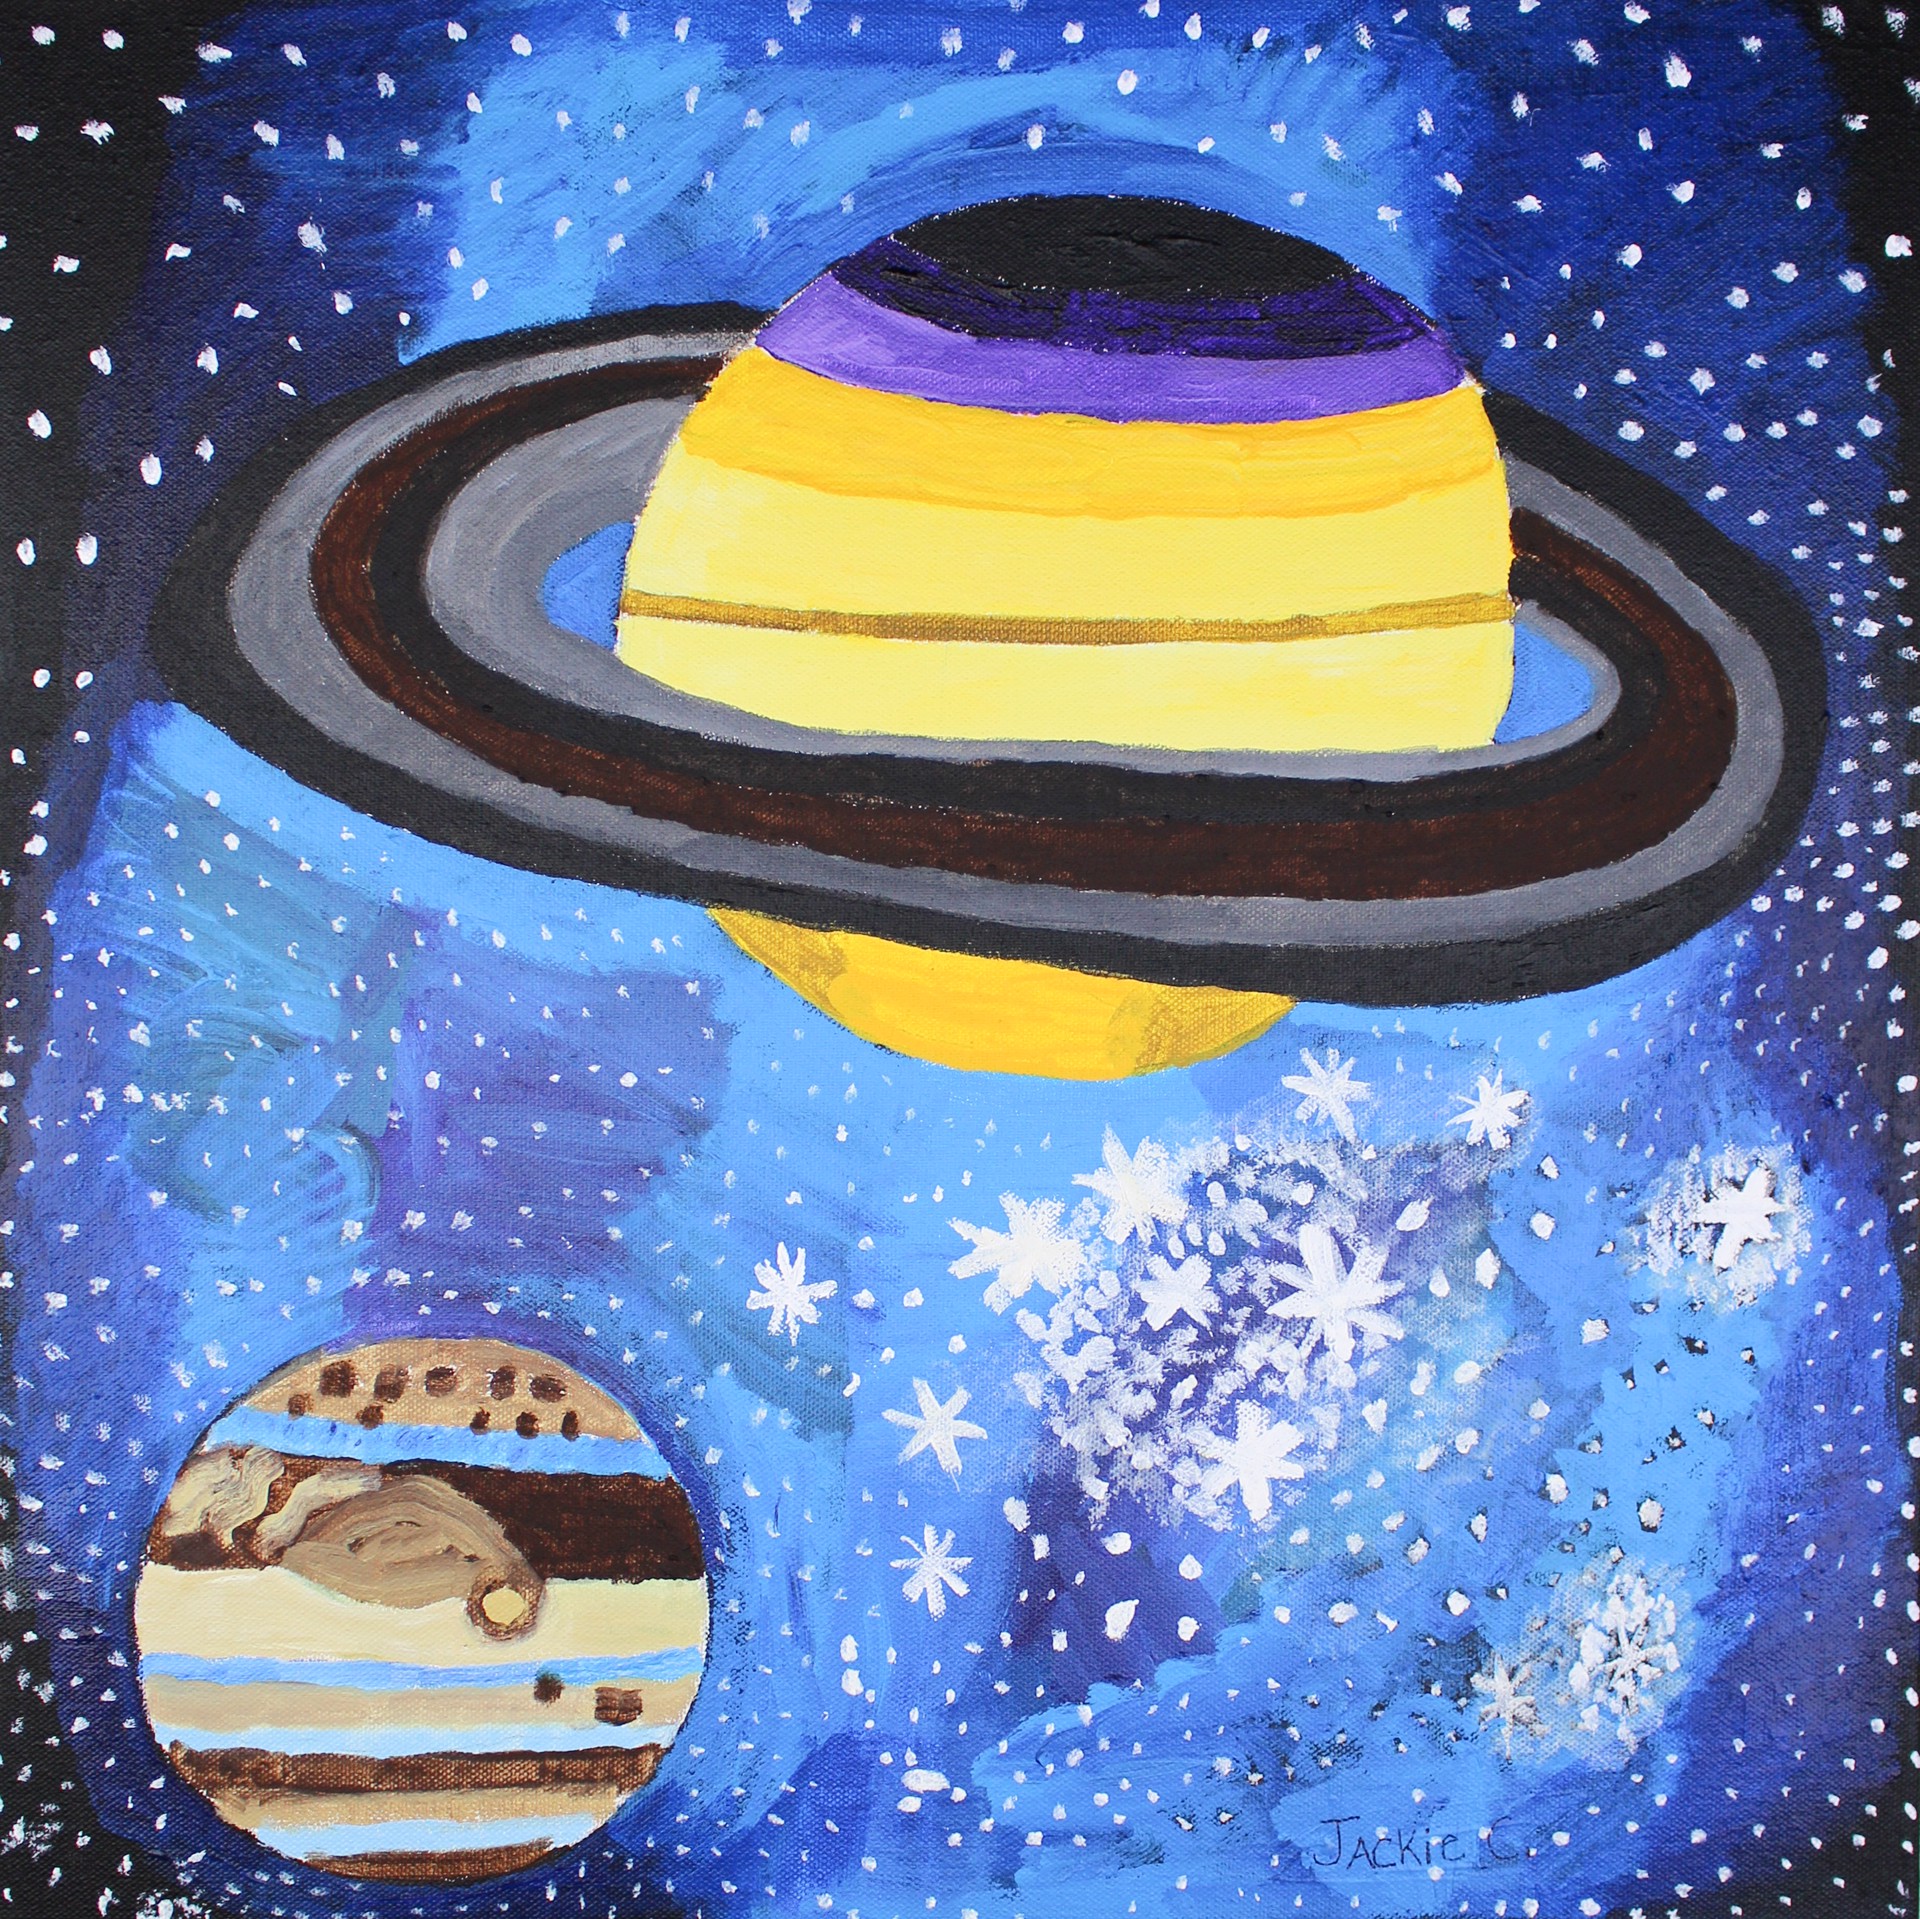  Jupiter and Saturn by Jacqueline Coleman